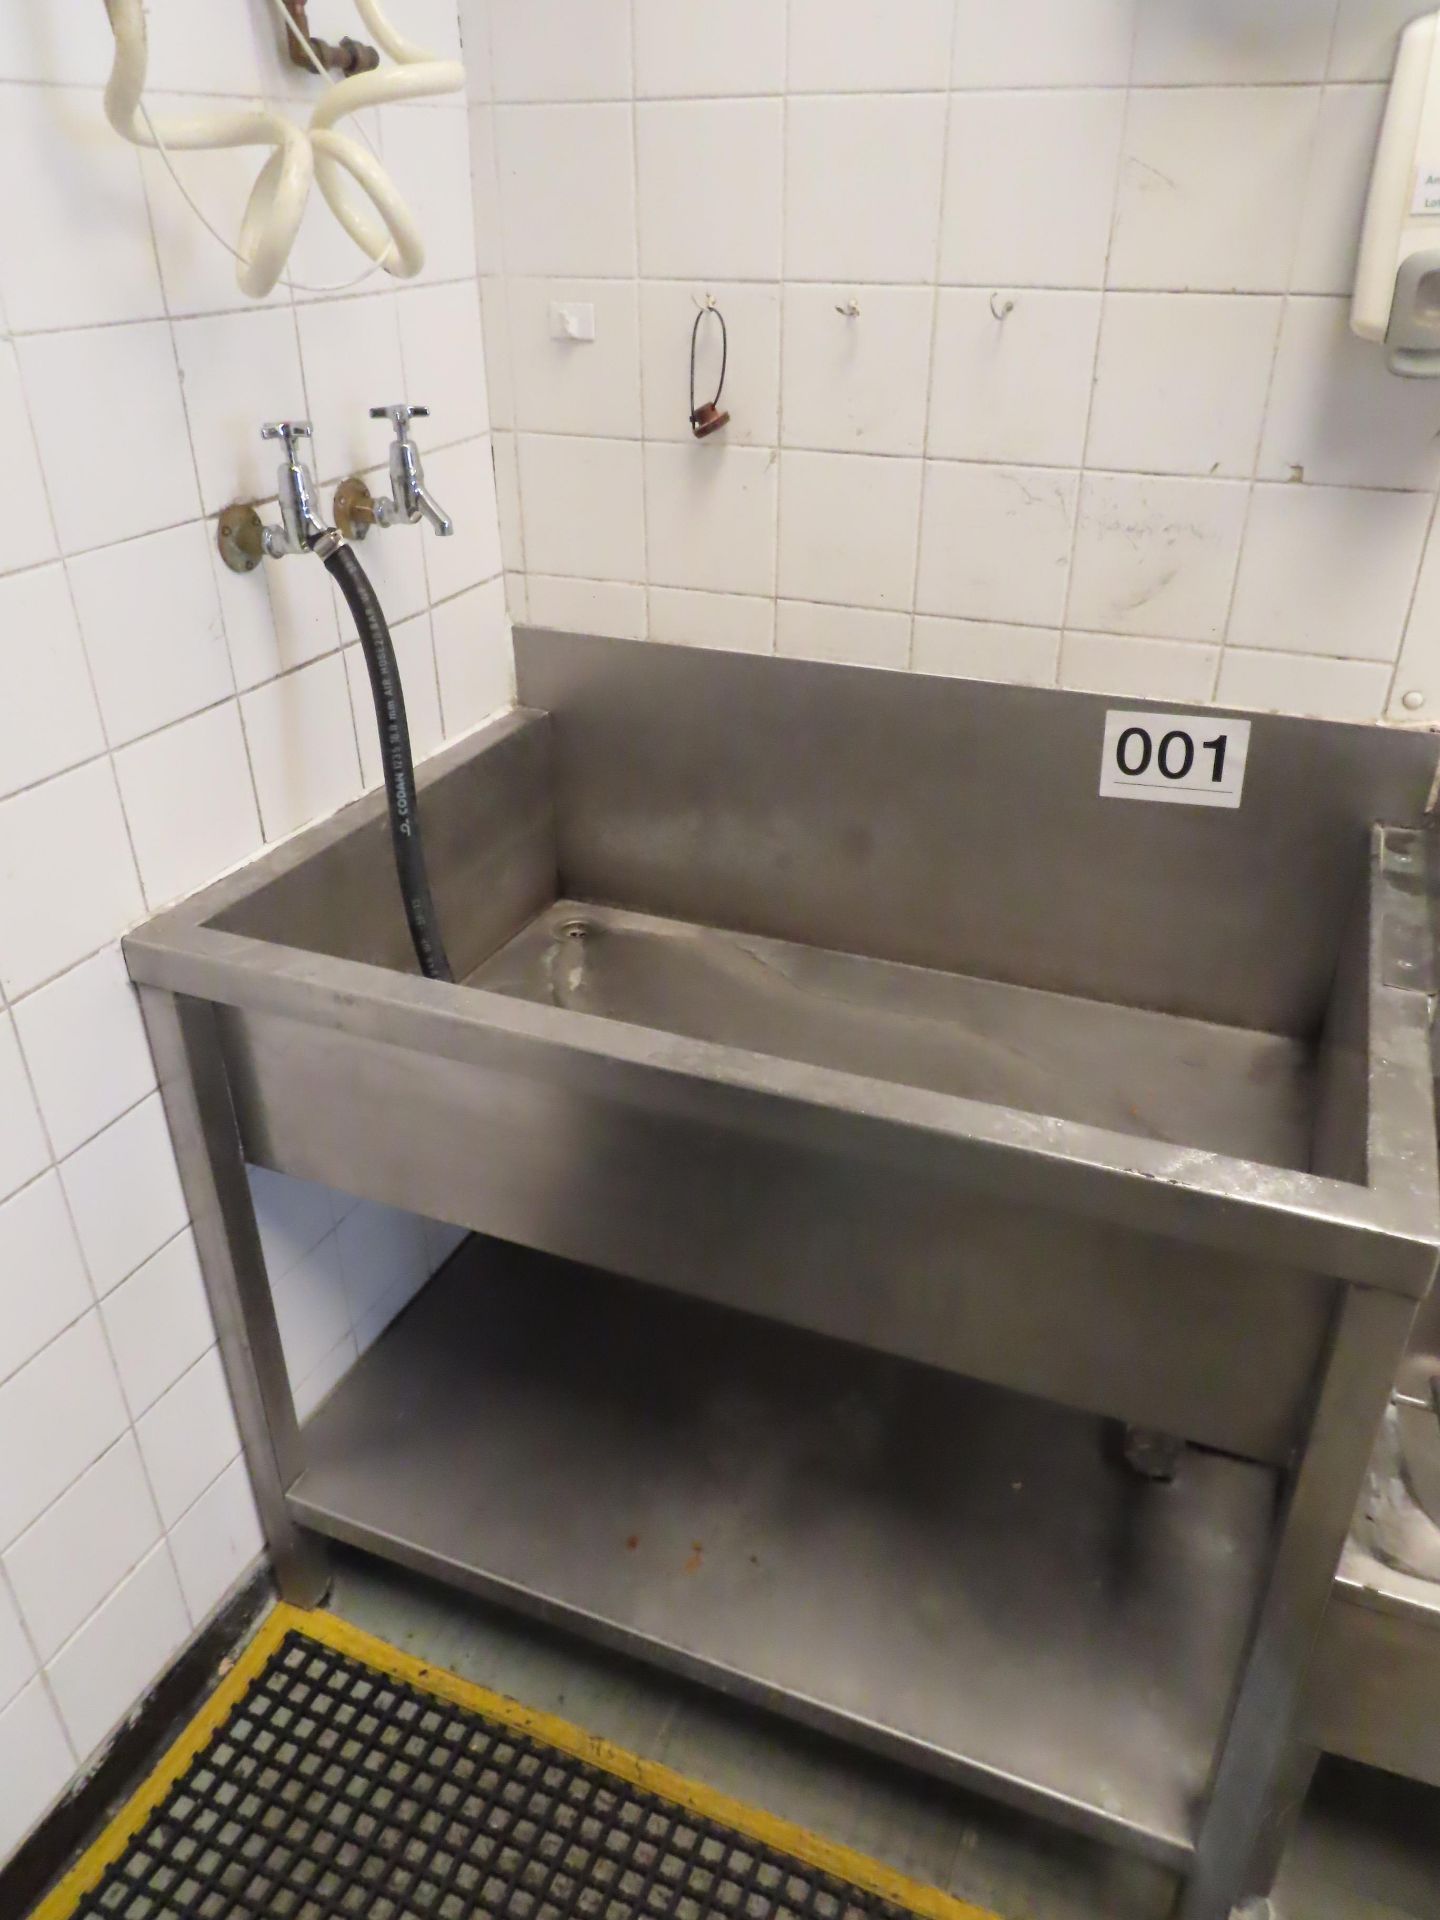 STAINLESS STEEL SINK.